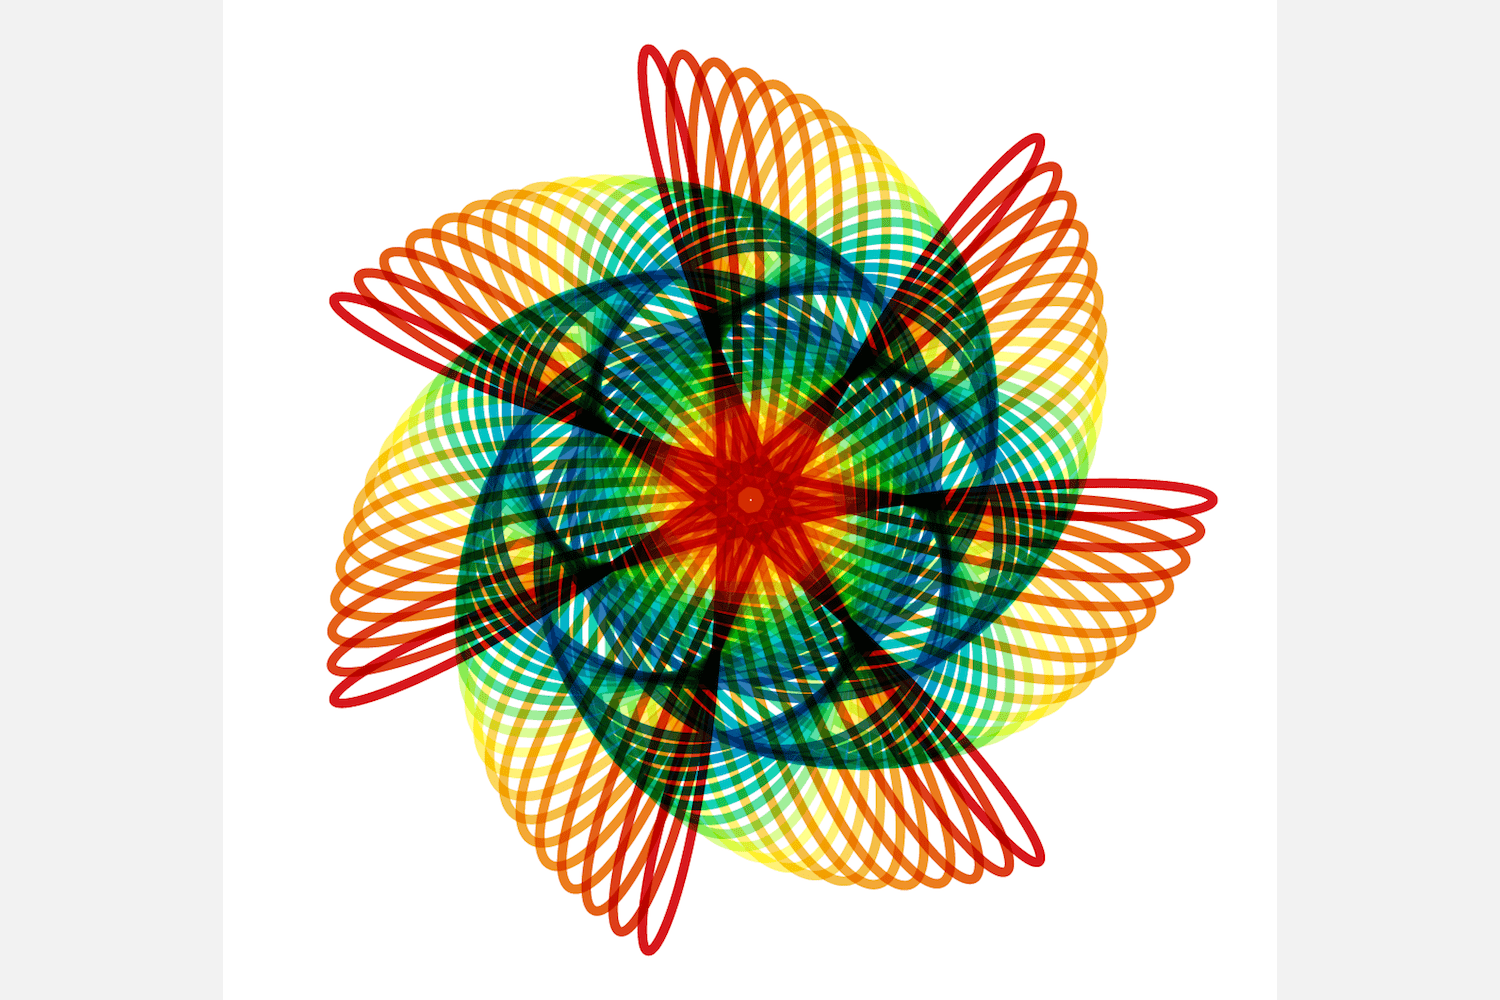 A spirograph from my 'Visualizing the Beauty of Math' presentation